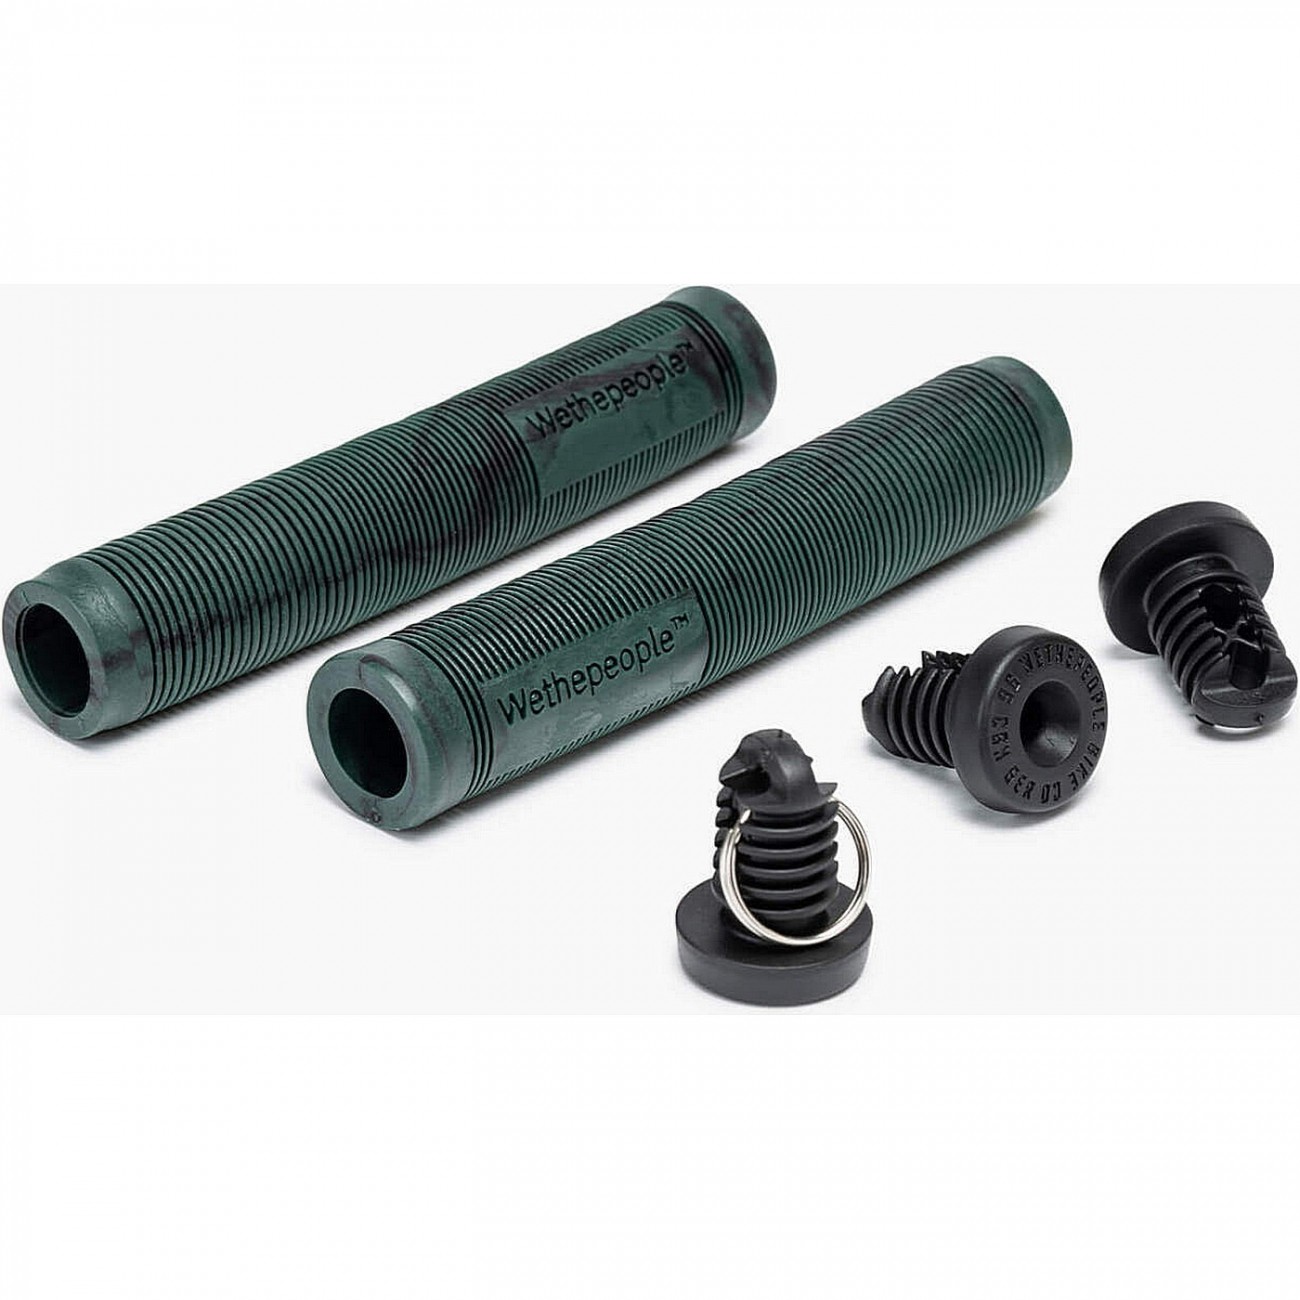 Perfect grip dark green/black swirl without flange 165mm x 29.5mm including extra key wedge barends  - 1